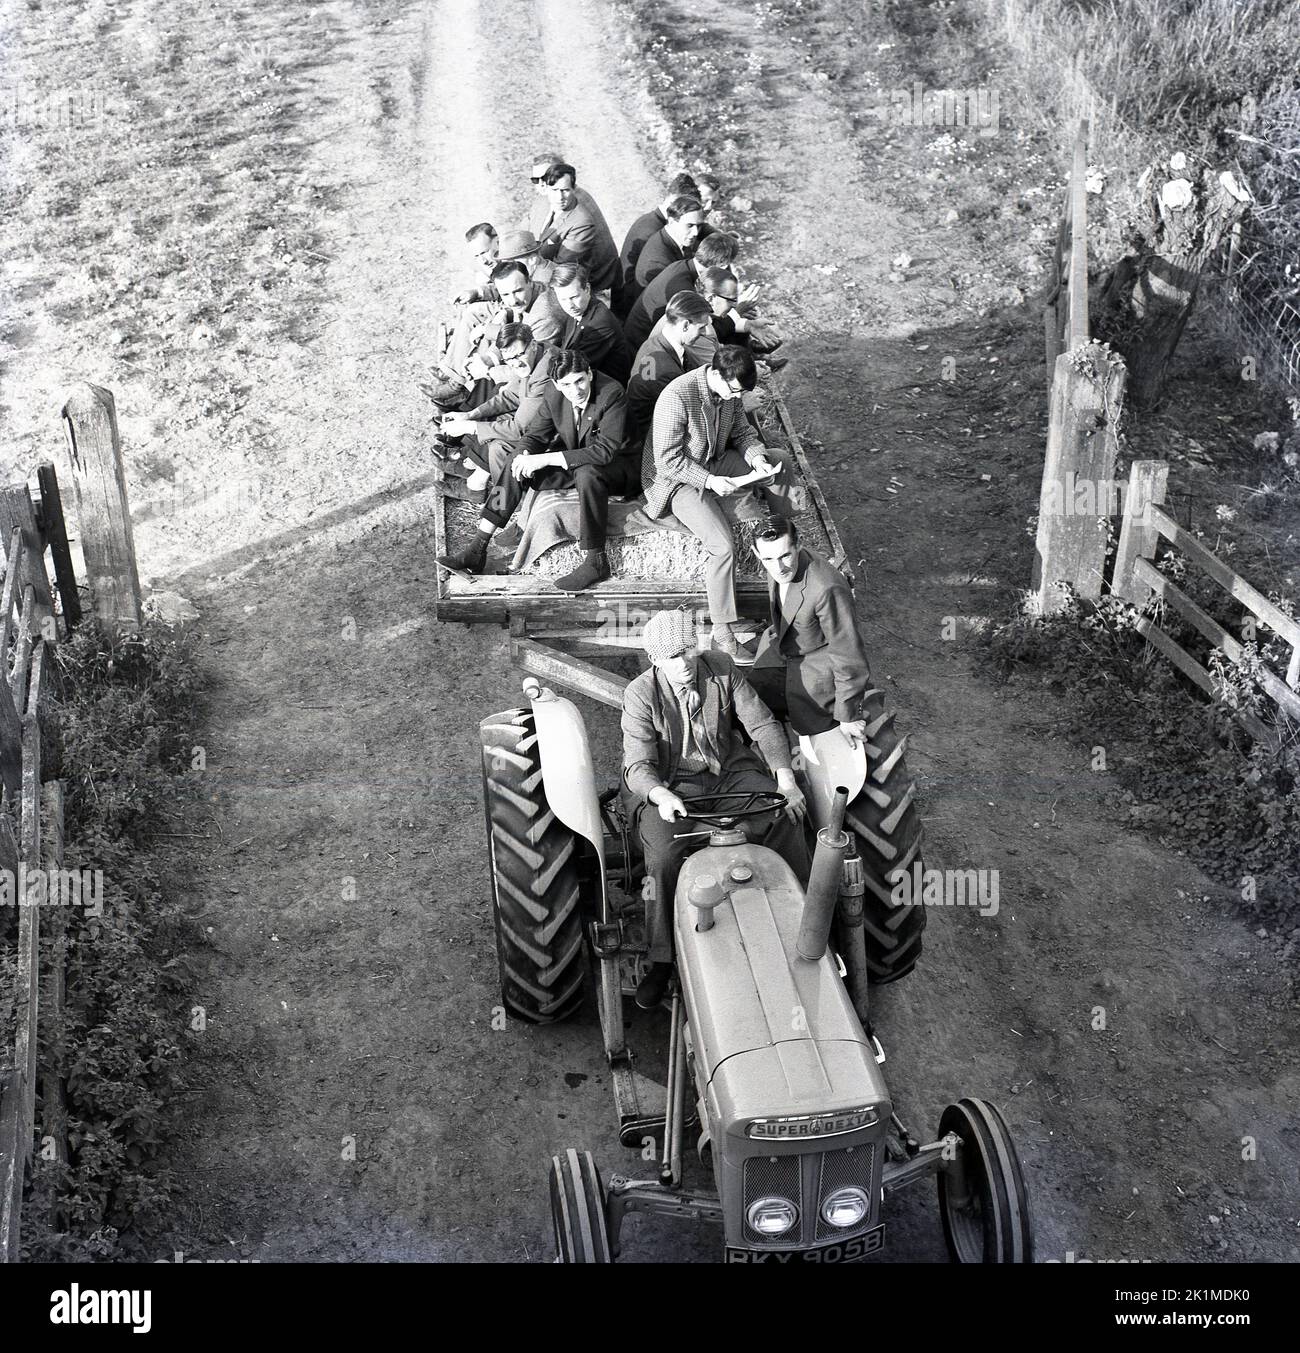 1964, historical, men on trailer on the back of a tractor, farm visit, tractor is a Super Dexta, numberplate RKY 905B Stock Photo